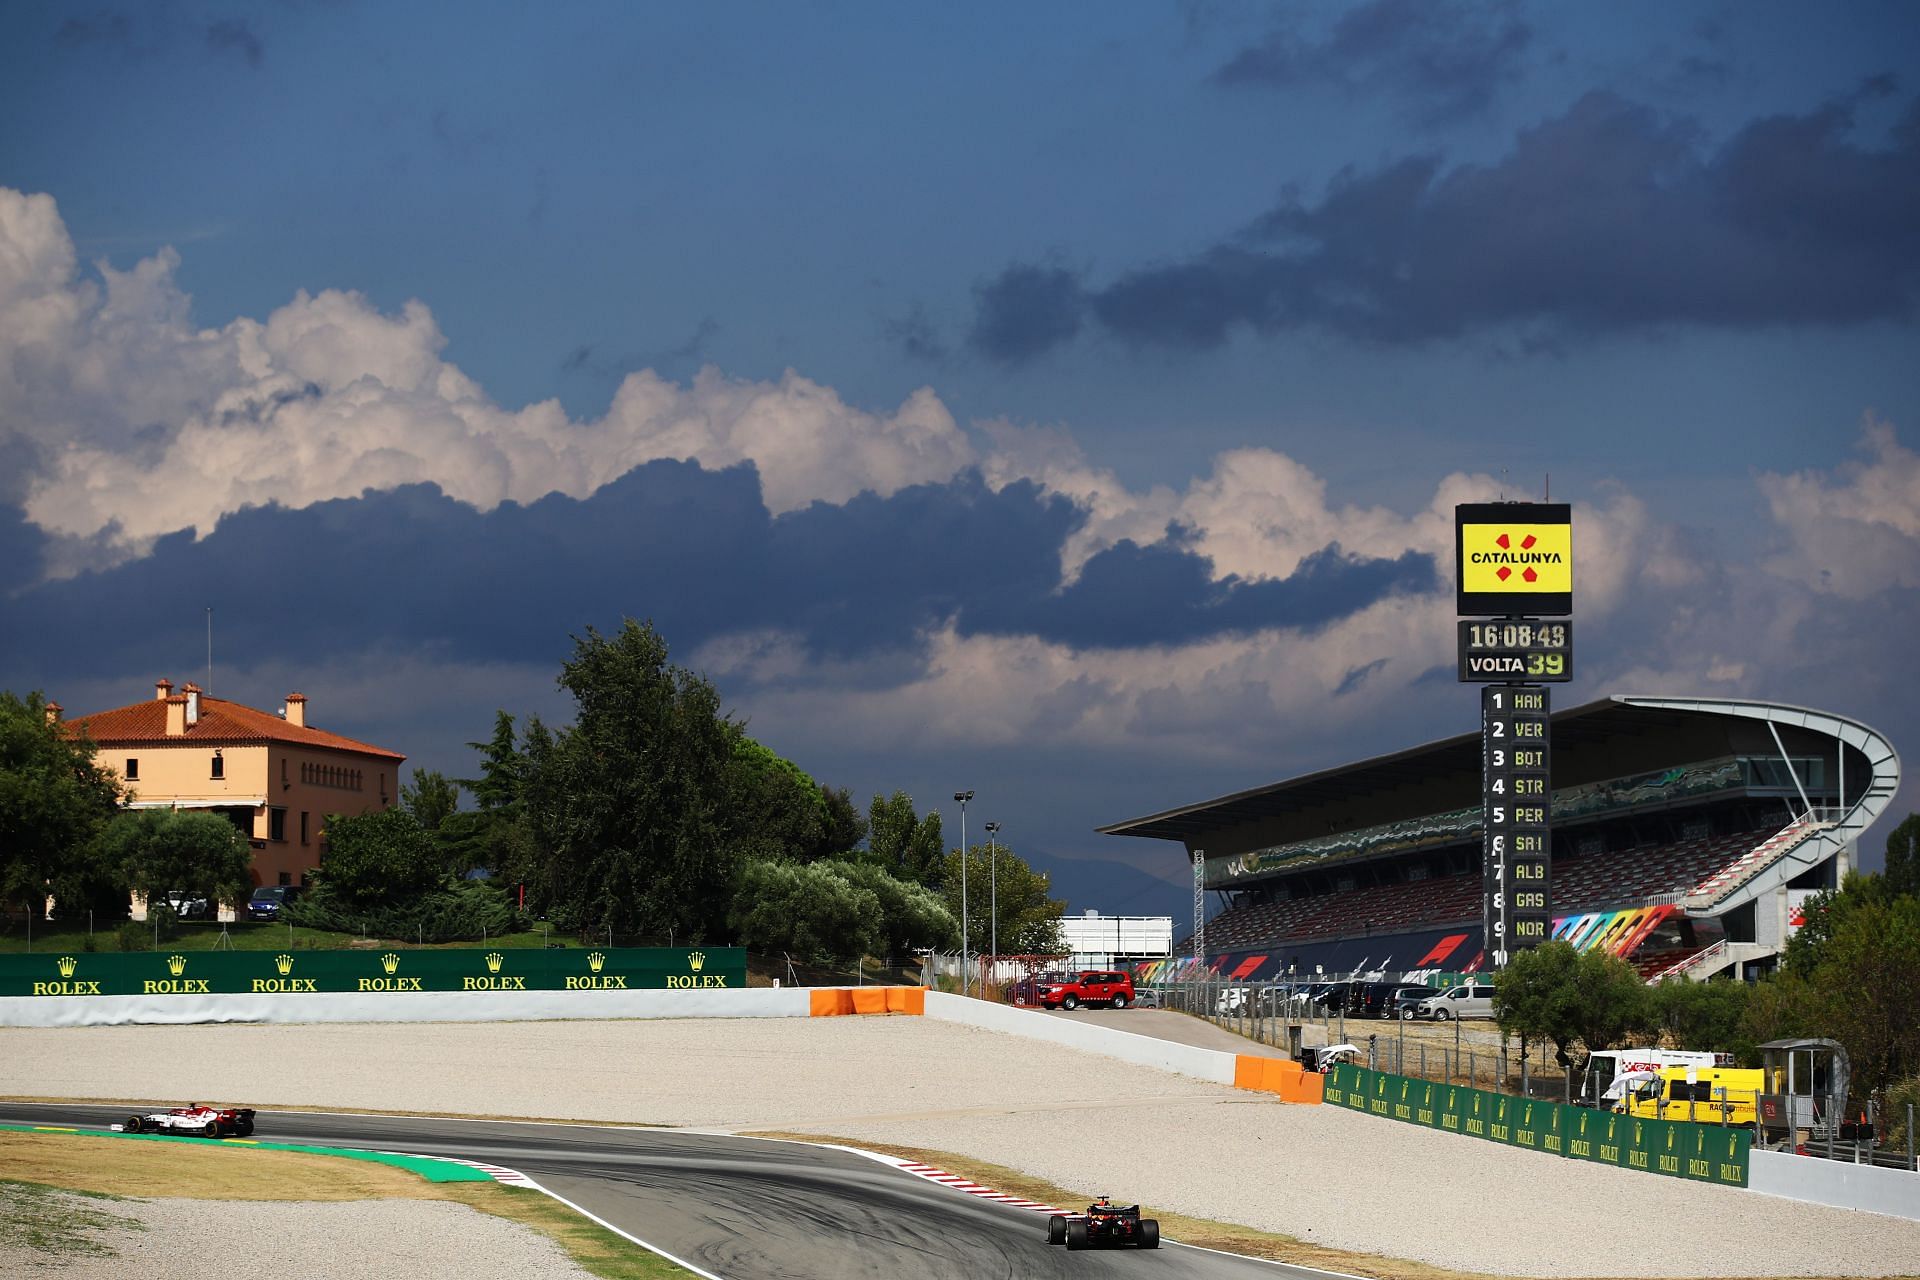 A general view on track during the 2020 F1 Grand Prix of Spain at Circuit de Barcelona-Catalunya (Photo by Bryn Lennon/Getty Images)